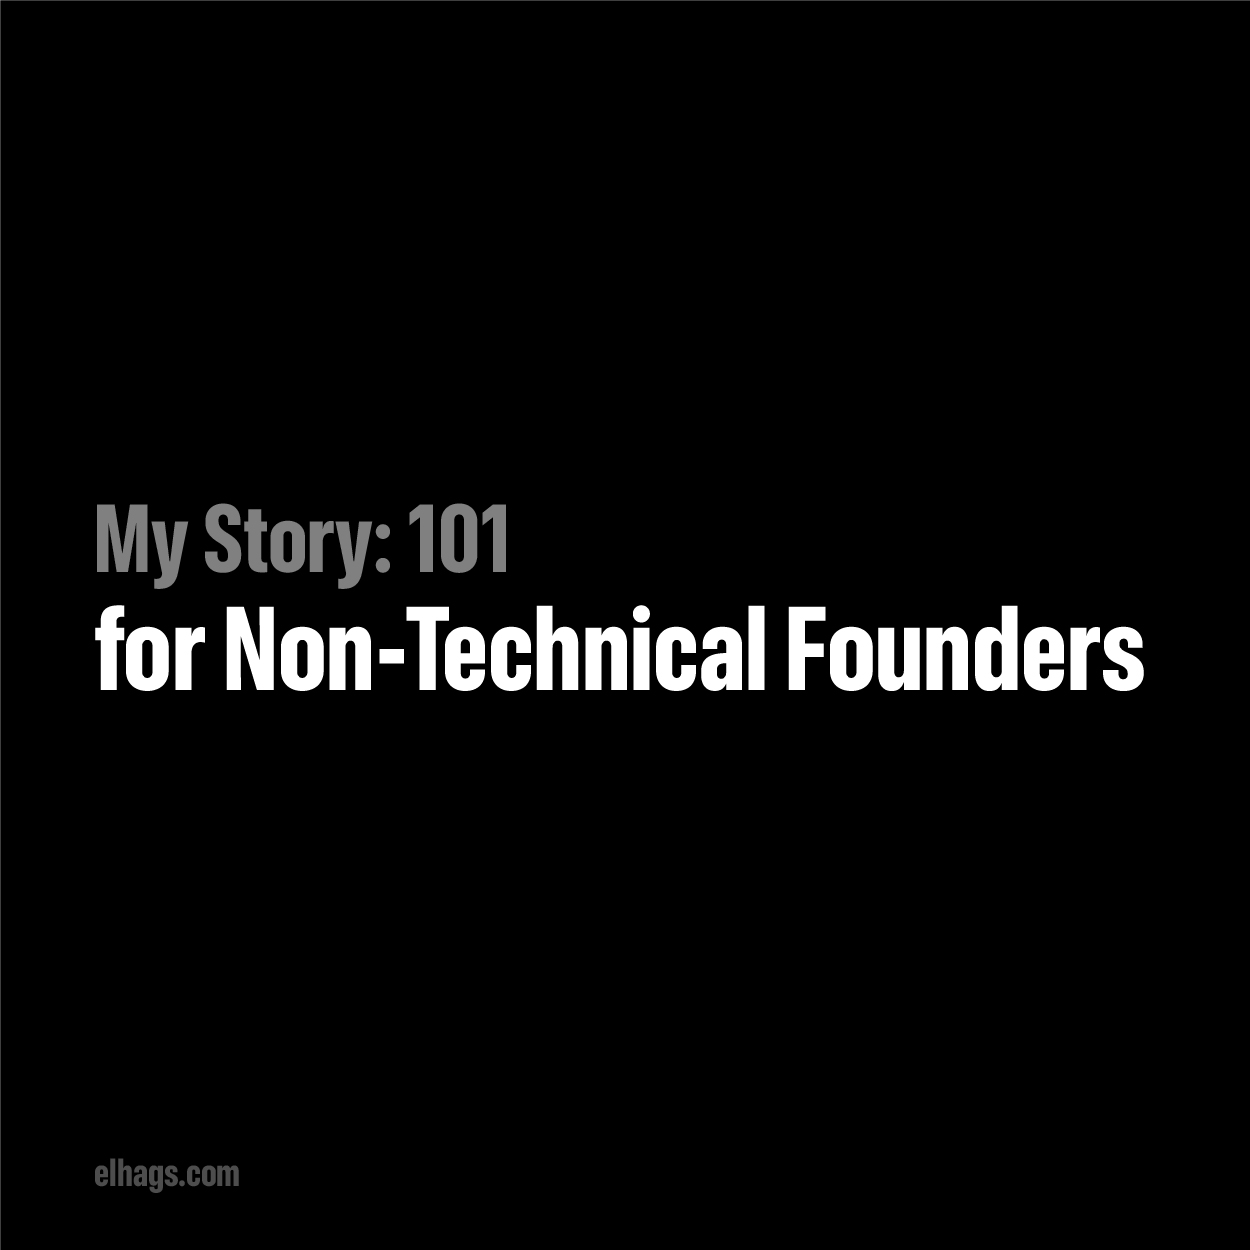 My Story: 101 – My journey from Security Guard to Fullstack Engineer